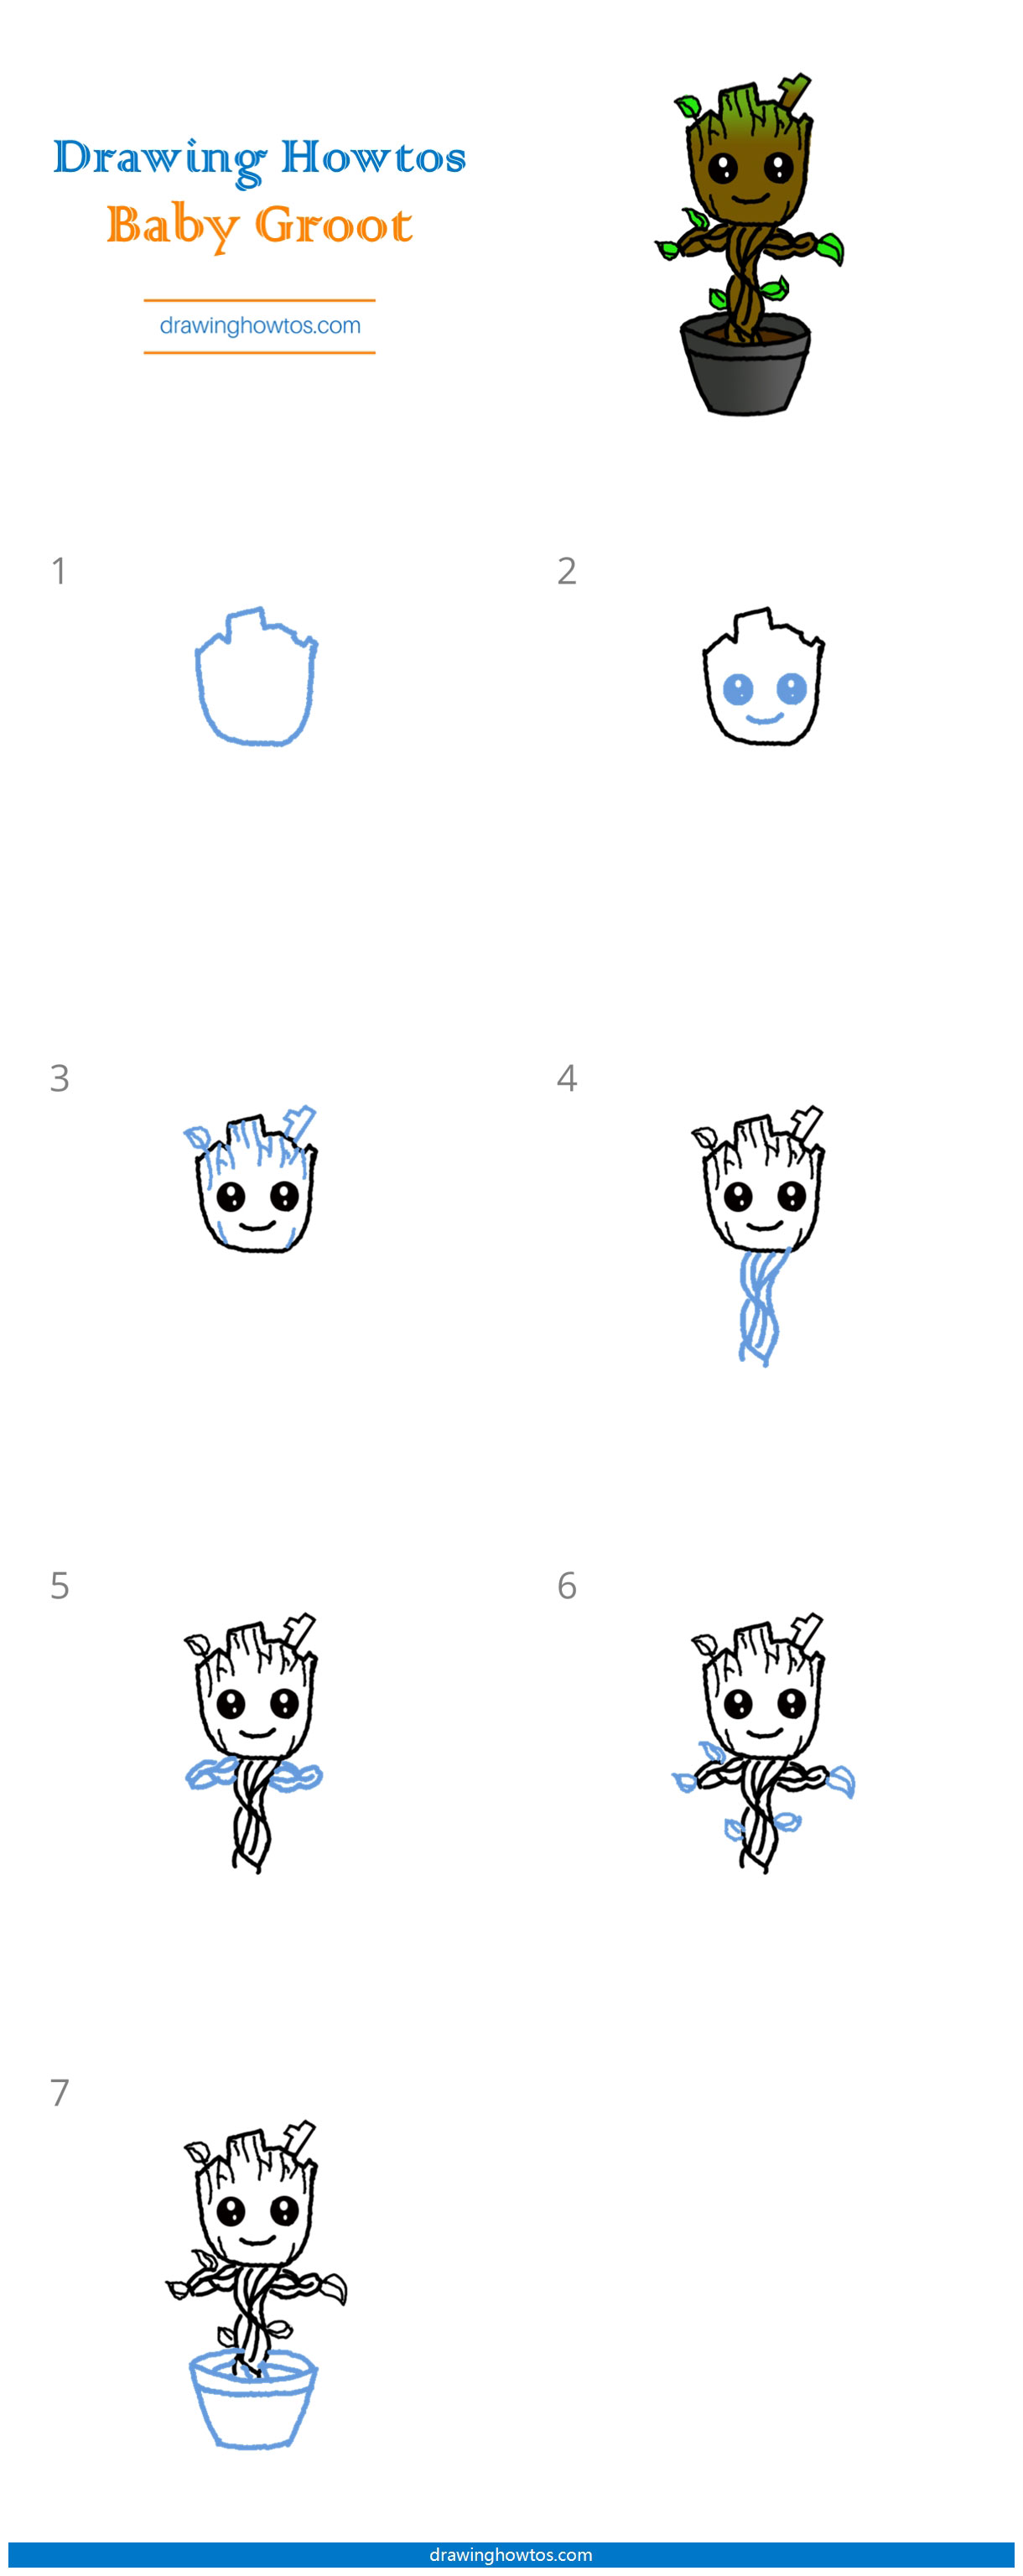 How to Draw Baby Groot Step by Step